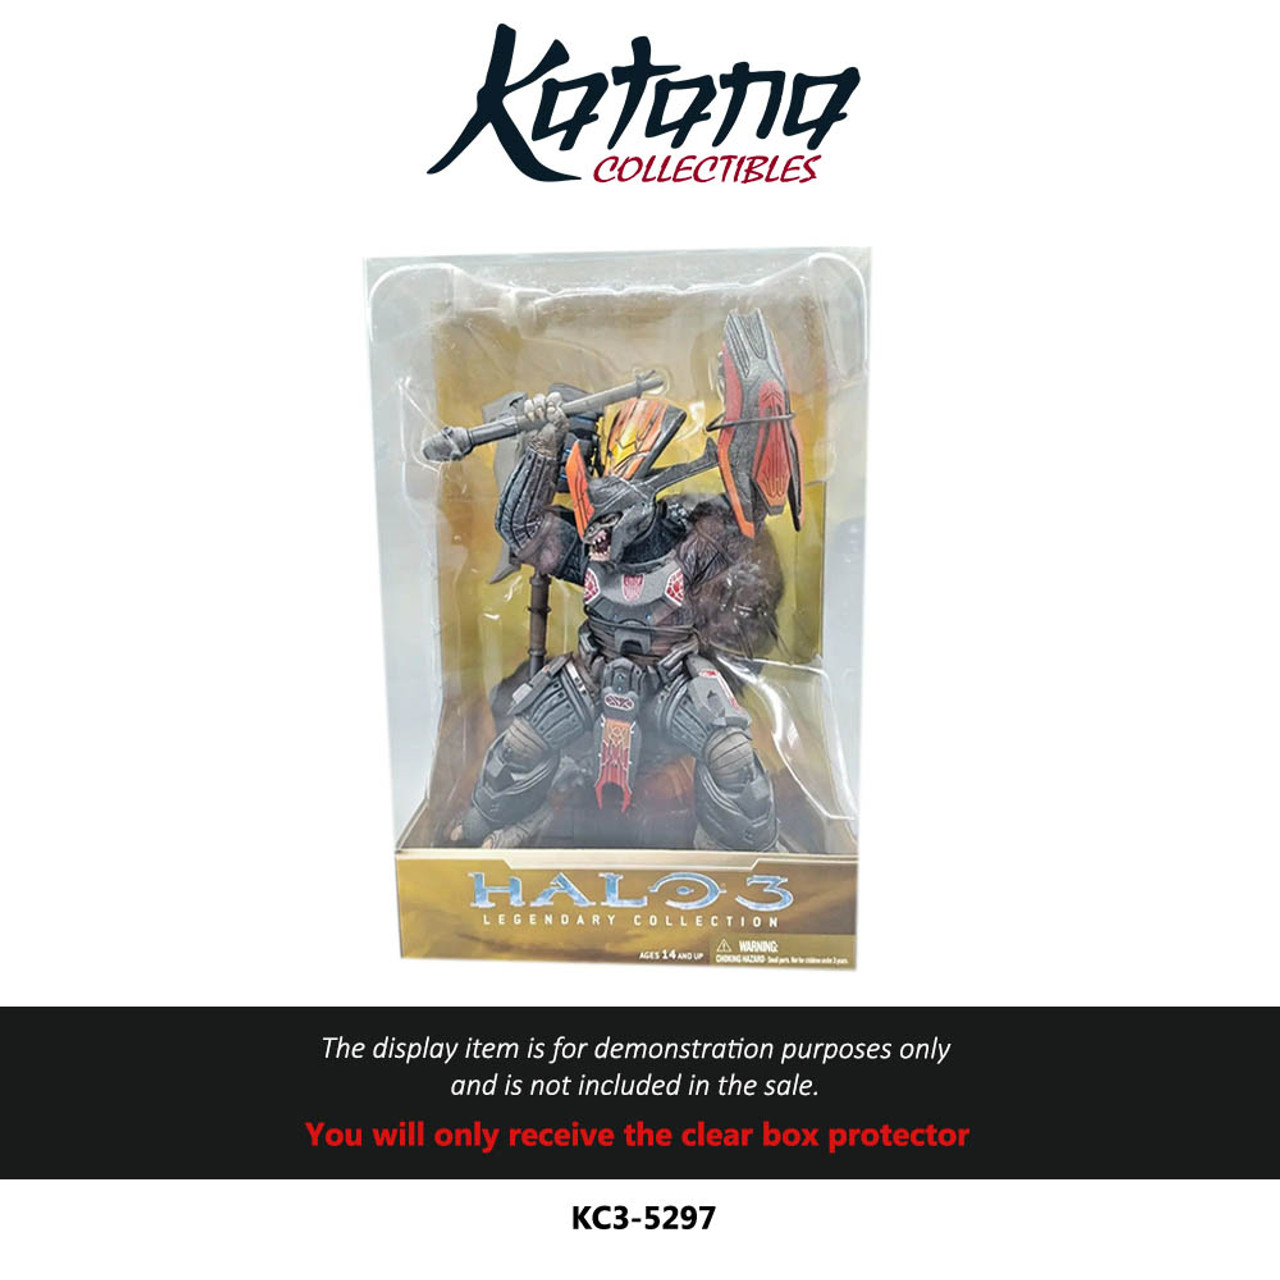 Katana Collectibles Protector For Brute Chieftan Halo 3 Legendary Collection